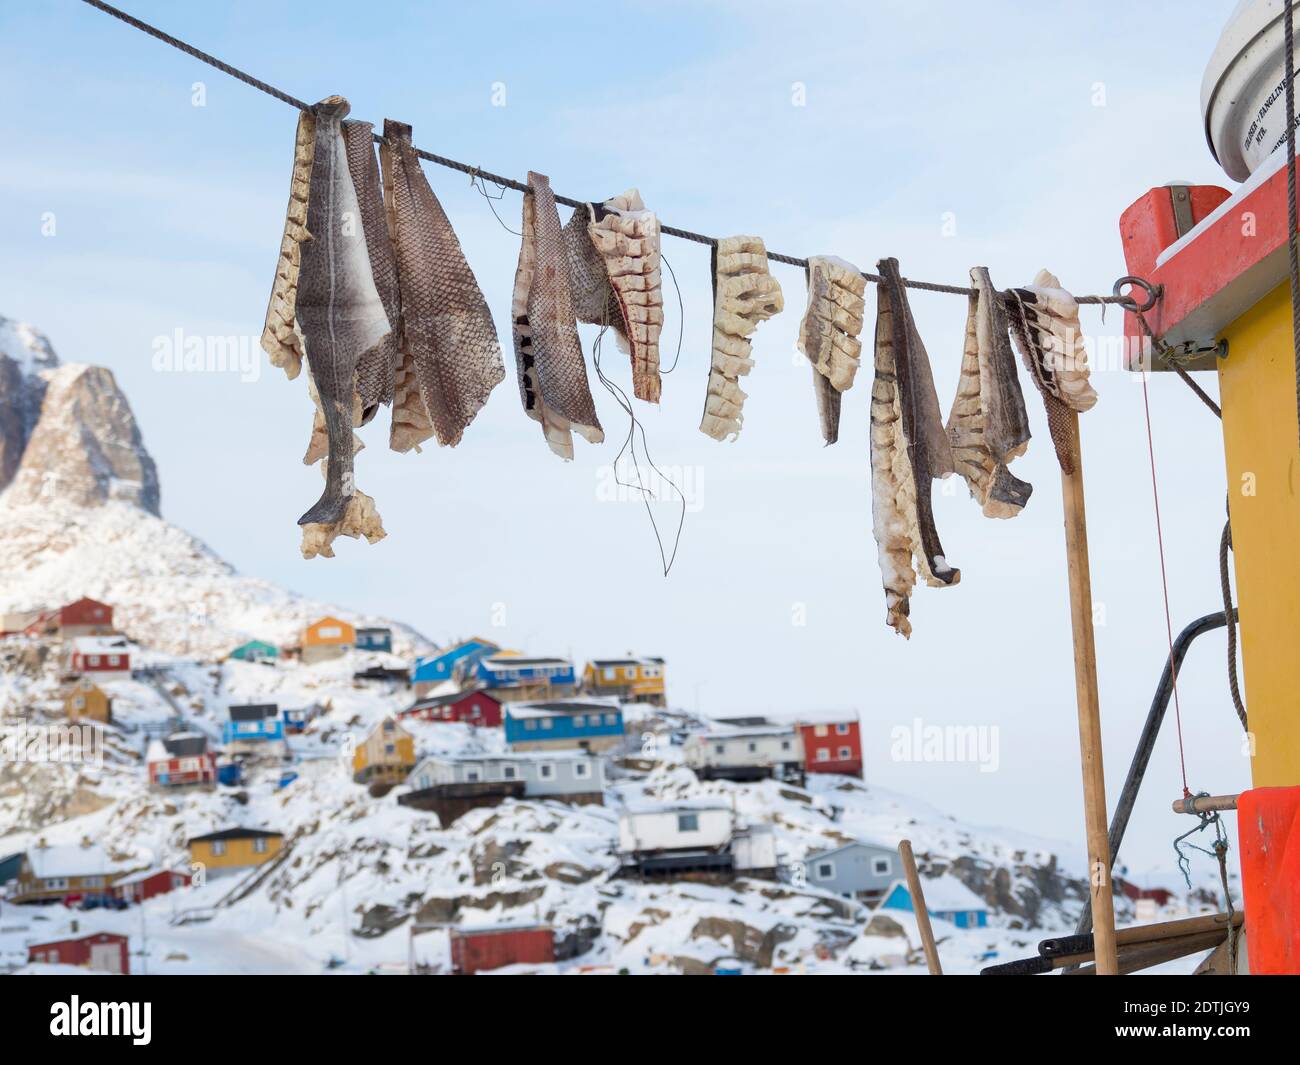 Town Uummannaq during winter in northern Greenland. Ship with drying fish in the frozen harbour. America, North America, Denmark, Greenland Stock Photo